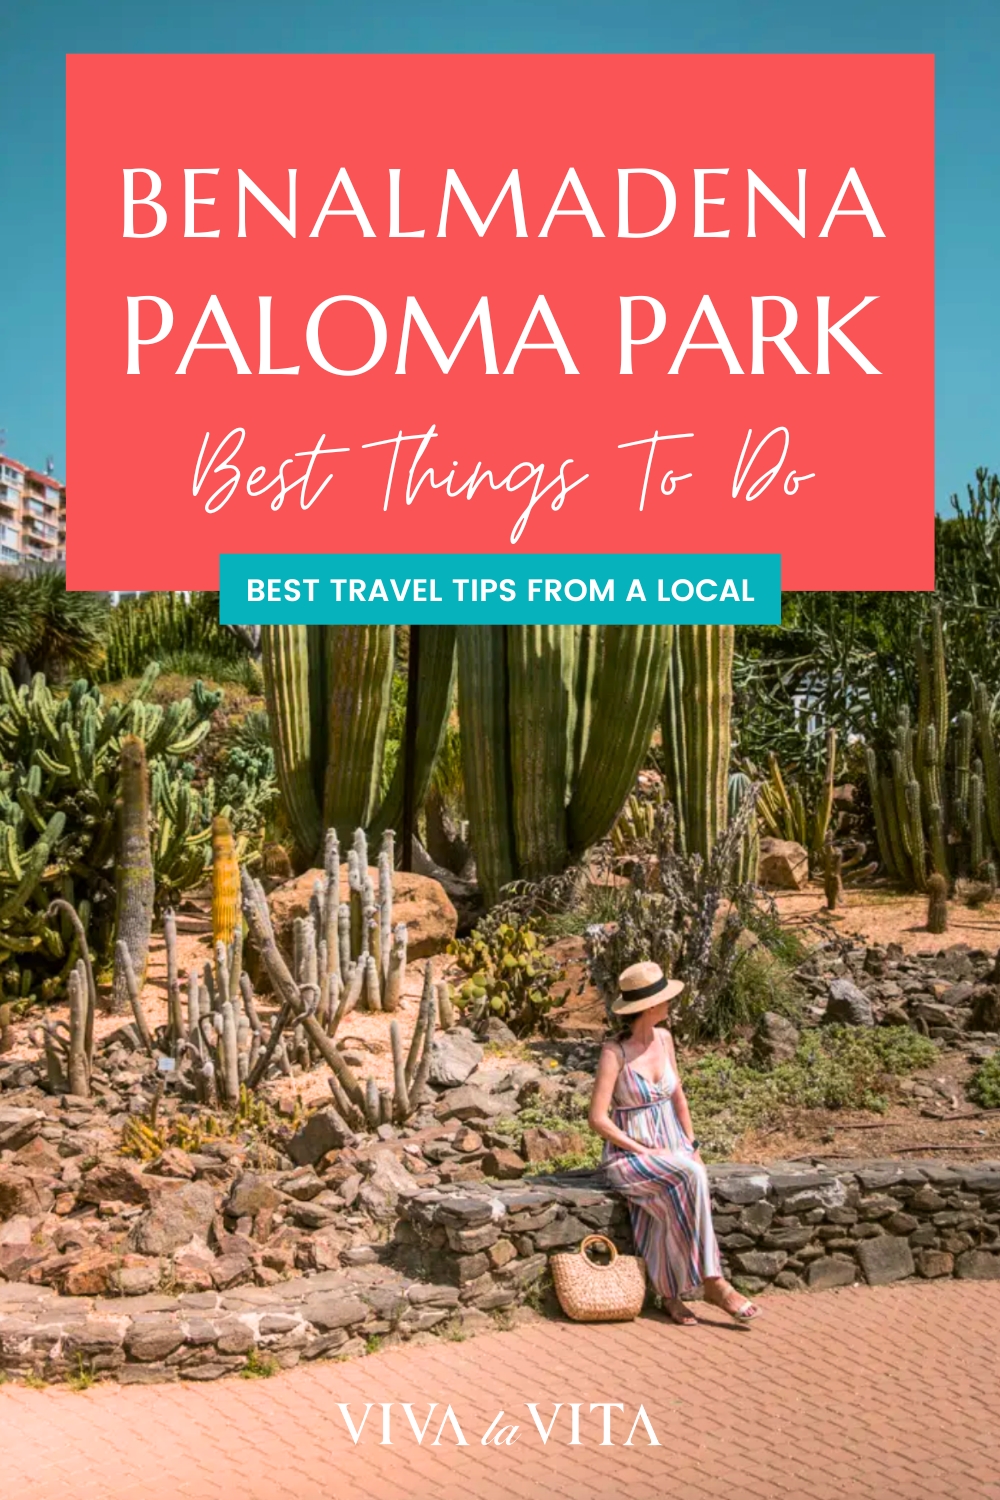 pinterest image showing cactus garden in Paloma Park in Benalmadena, with a headline: Benalmadena Paloma Park Best Things to Do